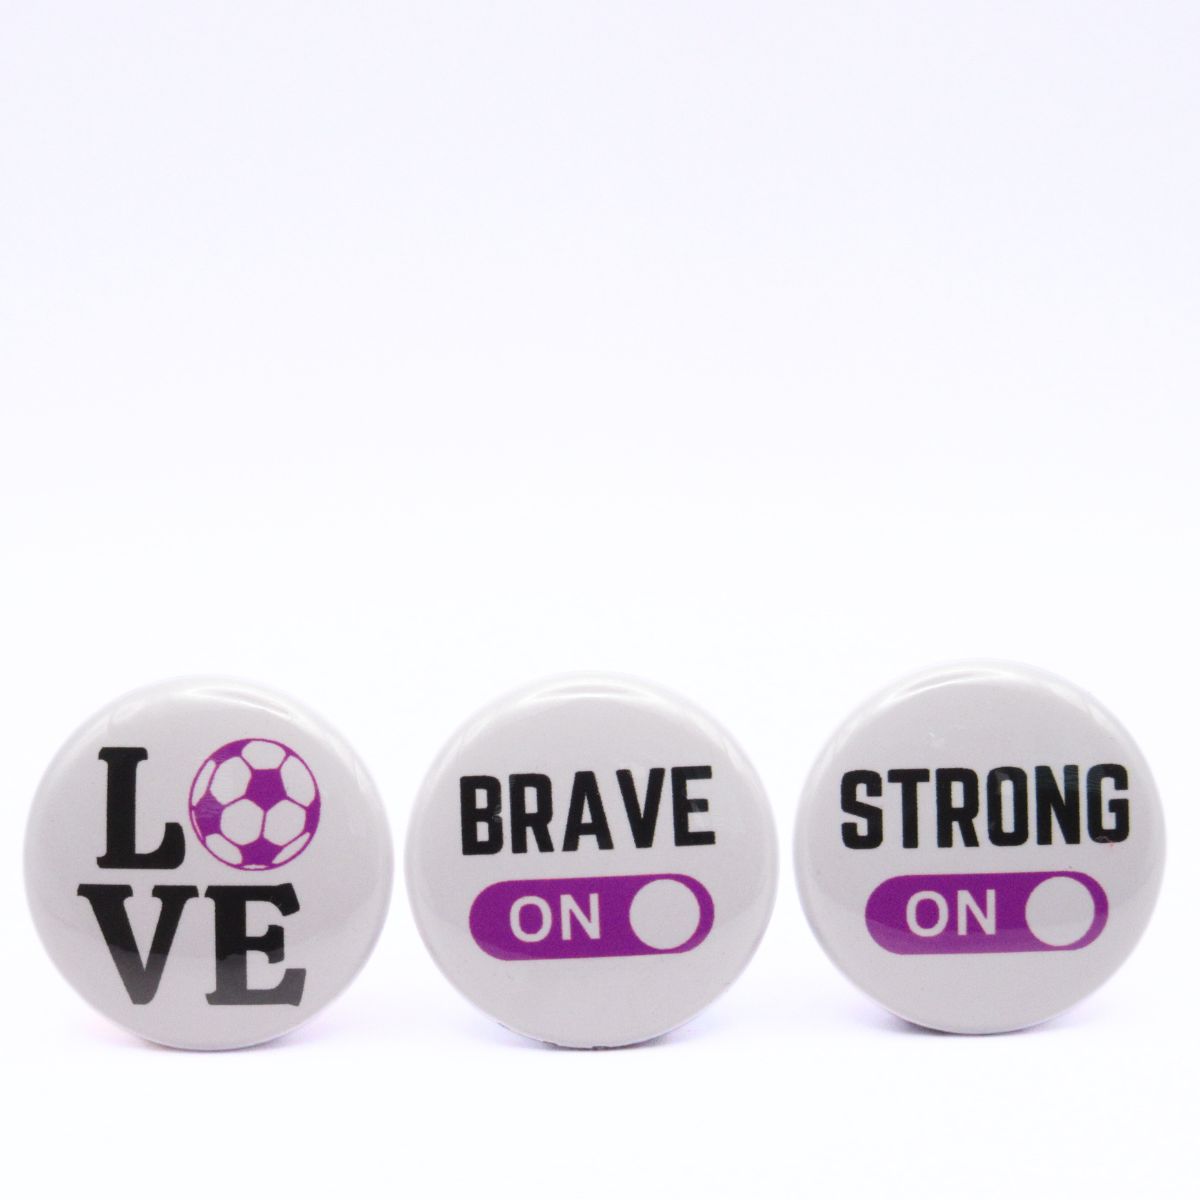 BooBooRoo Pinback Button (i.e. button, badge, pin) 3-pack displaying soccer love, fierce mode on, and strong mode on. Purple background for mode indicator and soccer ball.